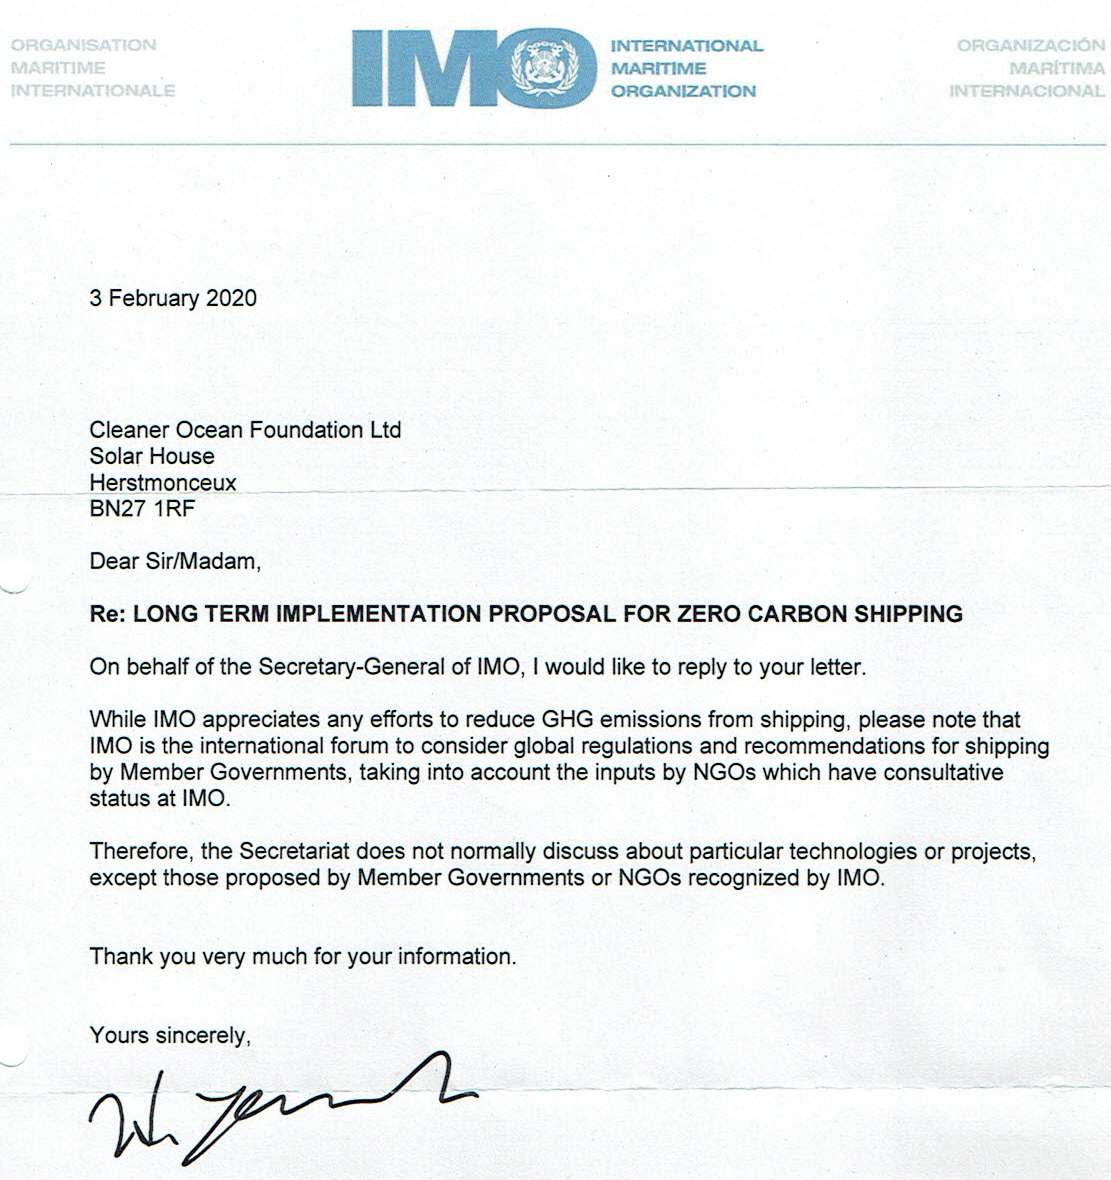 IMO behaving badly. Incredible, that any organization would be so closed shop. Supplied courtesy of Cleaner Ocean Foundation Ltd. If you may have come across any other examples of obstructive behaviour on the part of the United Nations, please let us know.